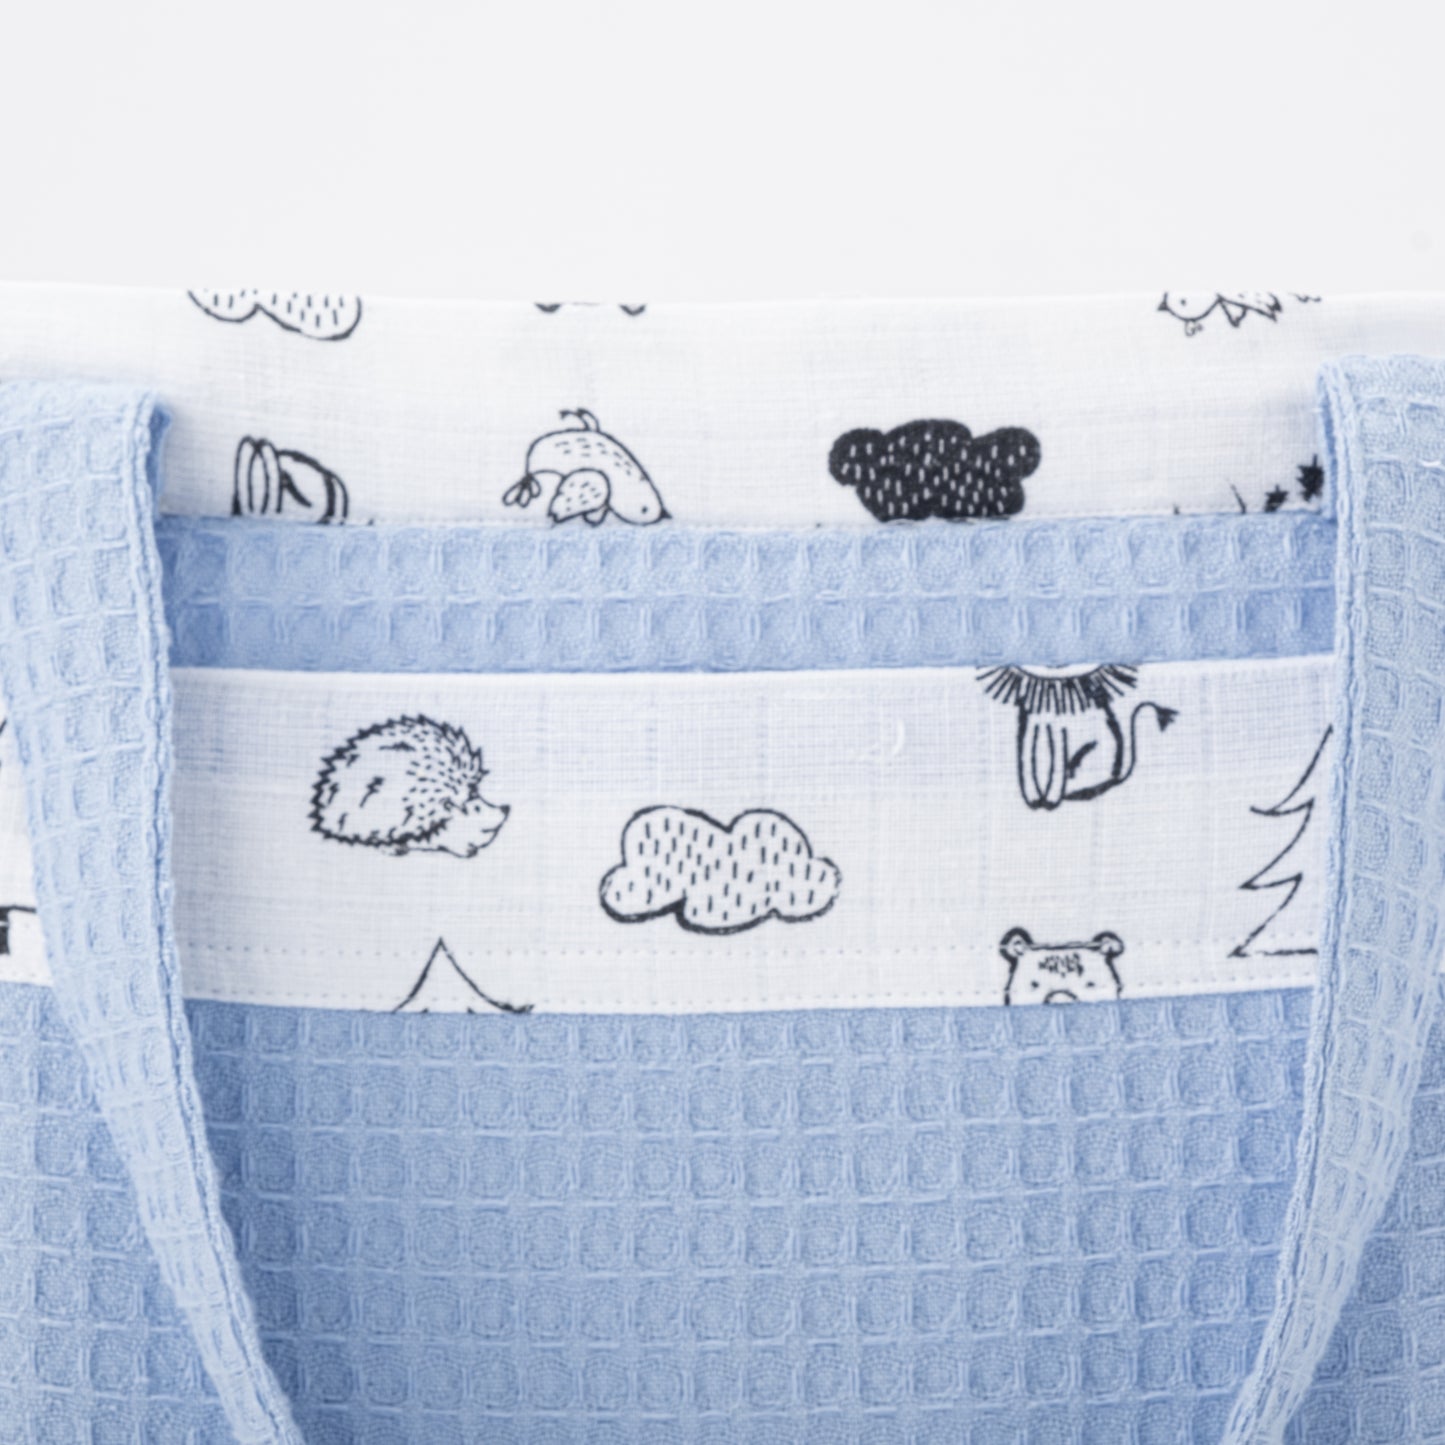 Baby Care Bag - Blue Honeycomb - Minimal Forest